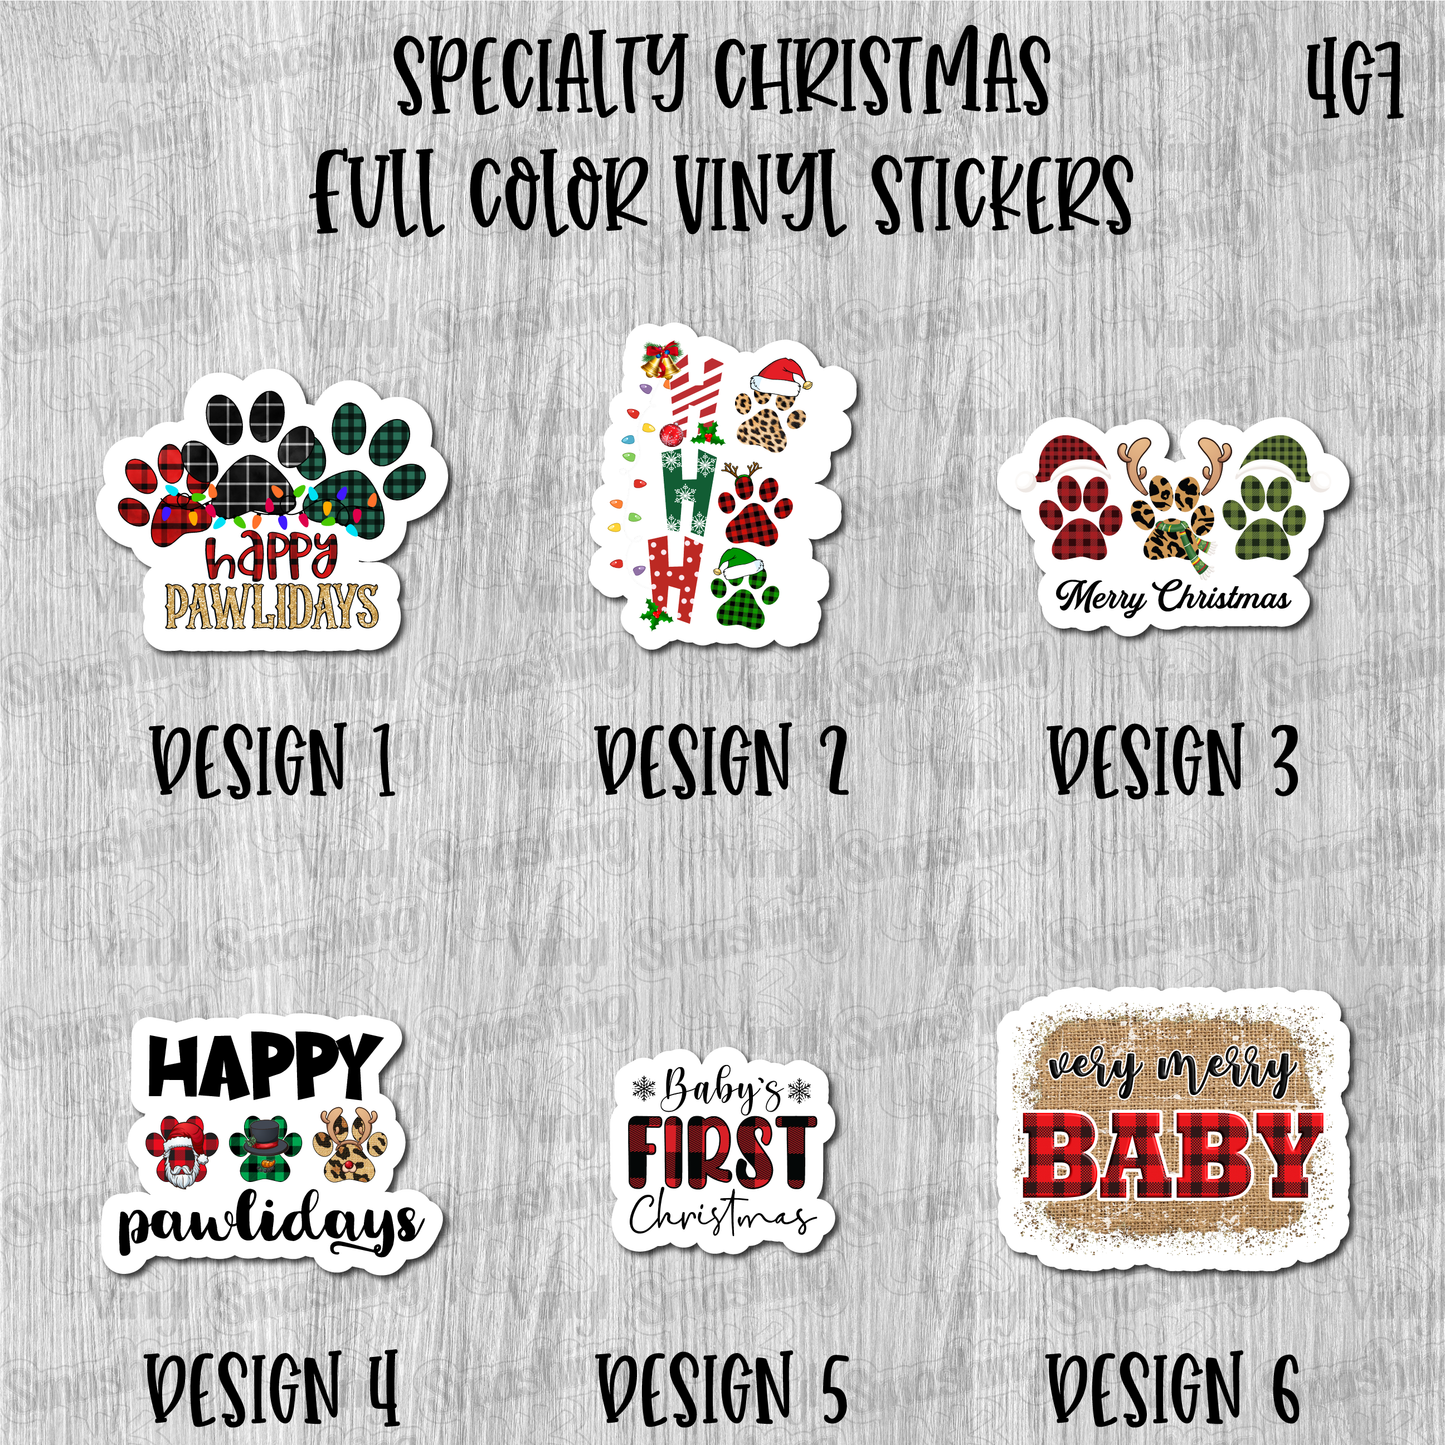 Specialty Christmas - Full Color Vinyl Stickers (SHIPS IN 3-7 BUS DAYS)